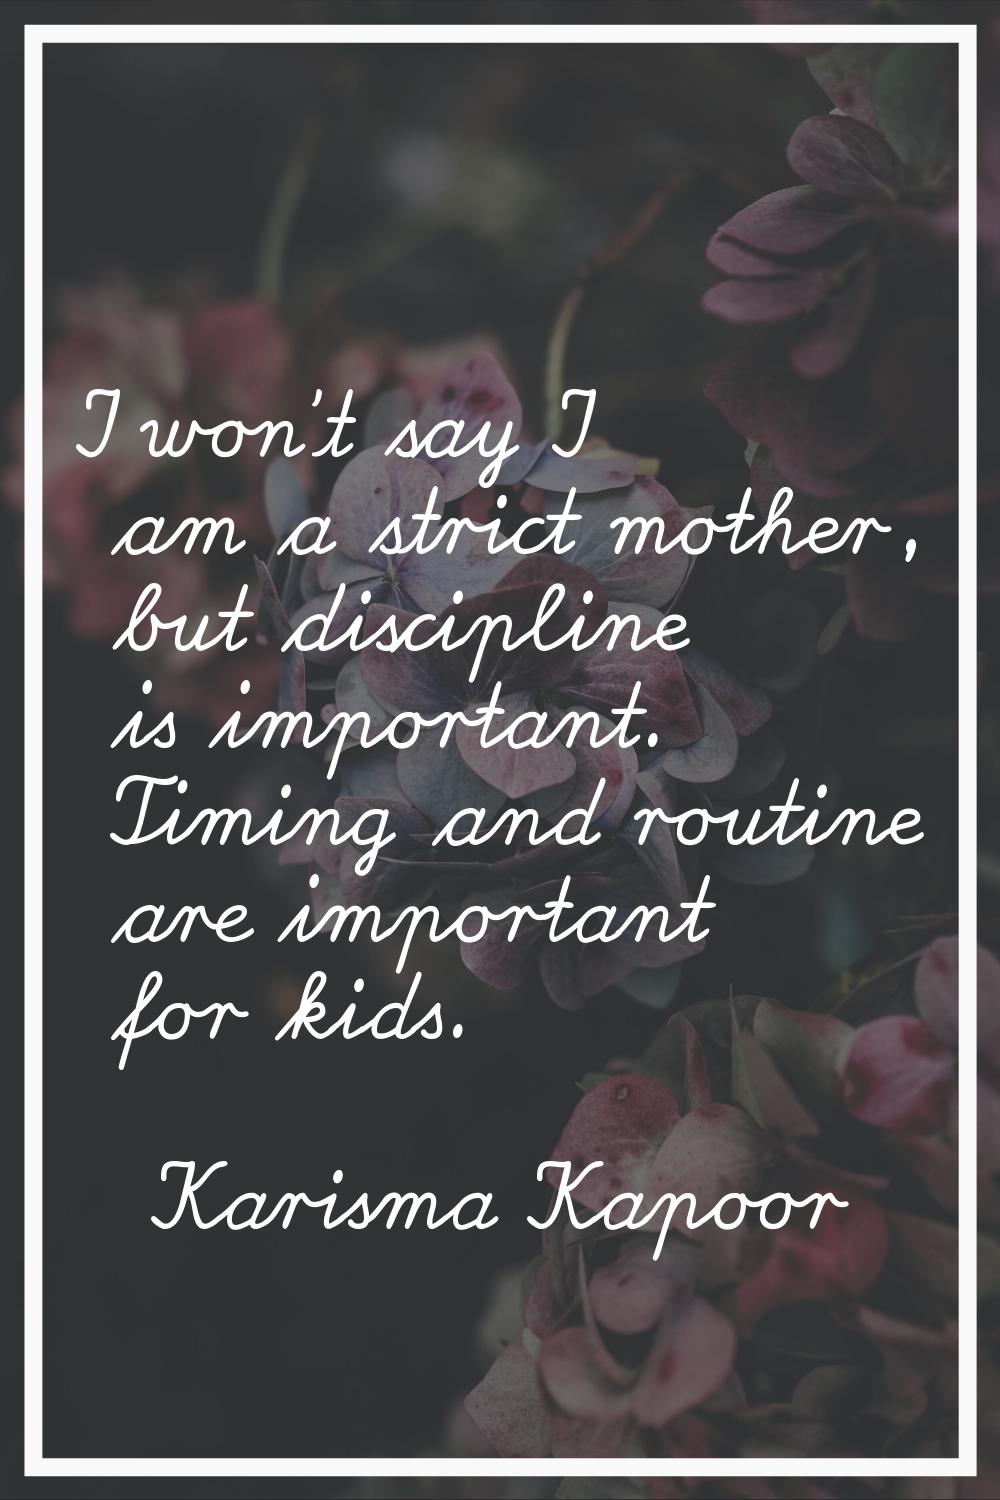 I won't say I am a strict mother, but discipline is important. Timing and routine are important for